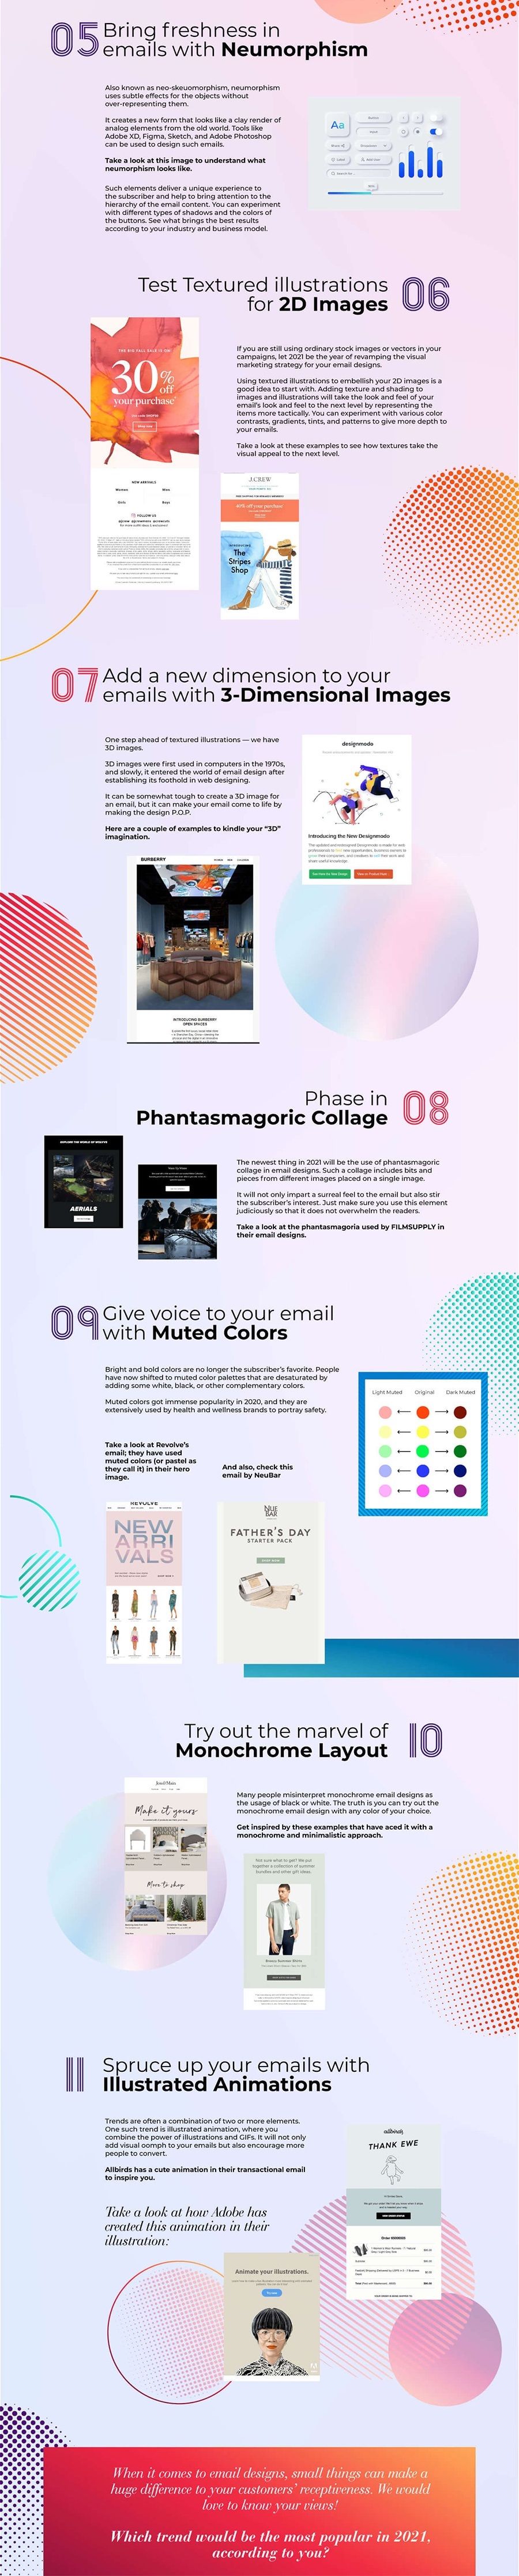 11 email design trends